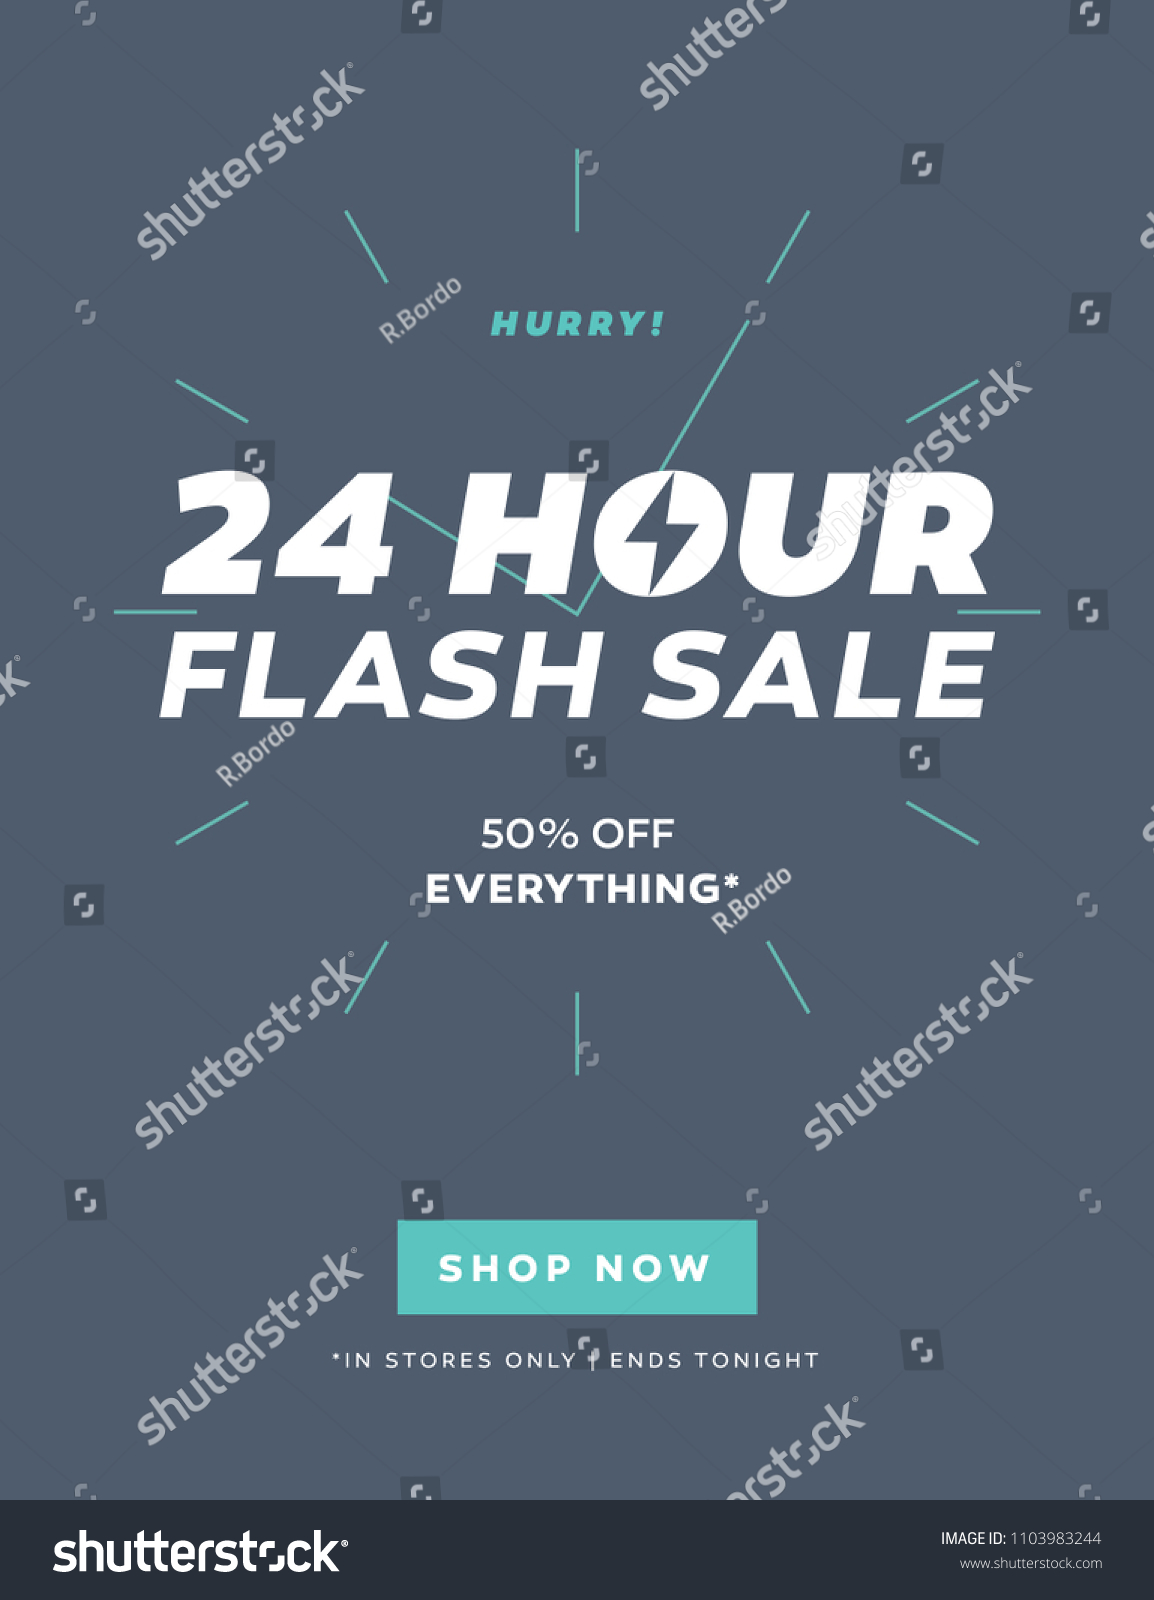 SVG of 24 Hour Flash Sale Limited Offer Email Template with Shop Now Button. Special Discount Offer Flyer Template. Trendy Color Call To Action Promo Discount Coupon, Flyer, Banner. Vector Illustration. svg